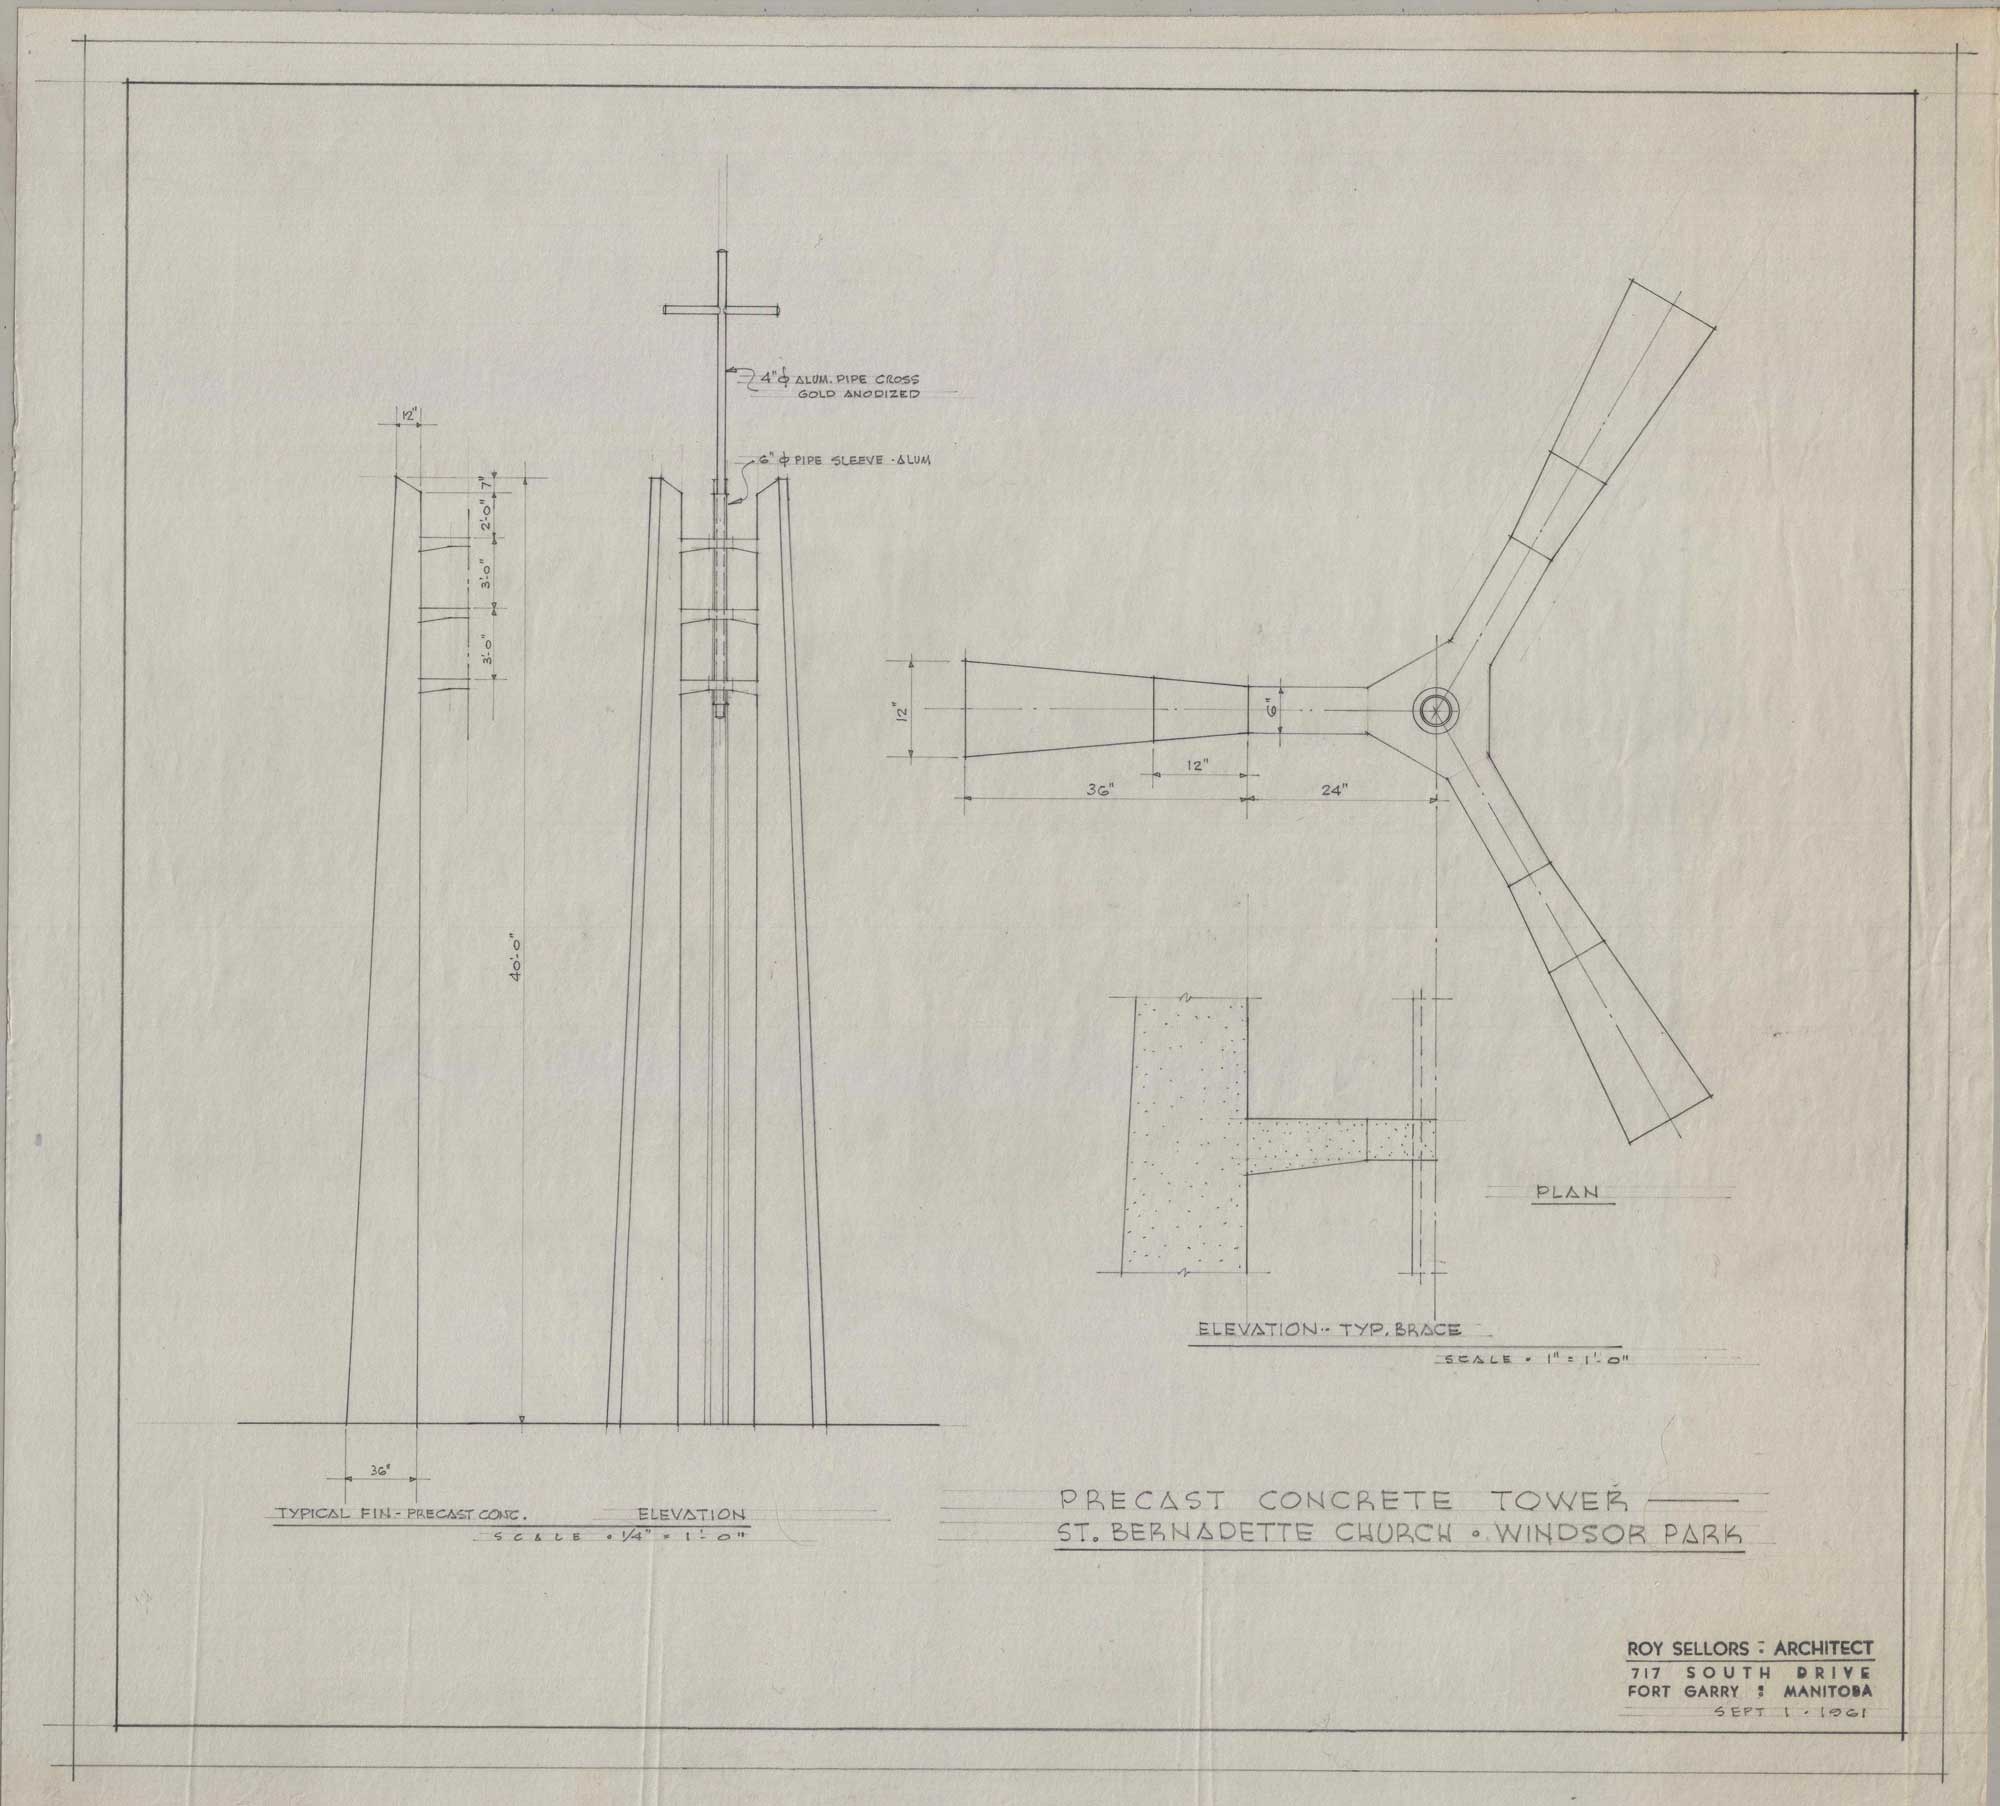 Image shows drawing of St. Bernadette Church's precast concrete tower. A minimalist cross is suspended on concrete beams.